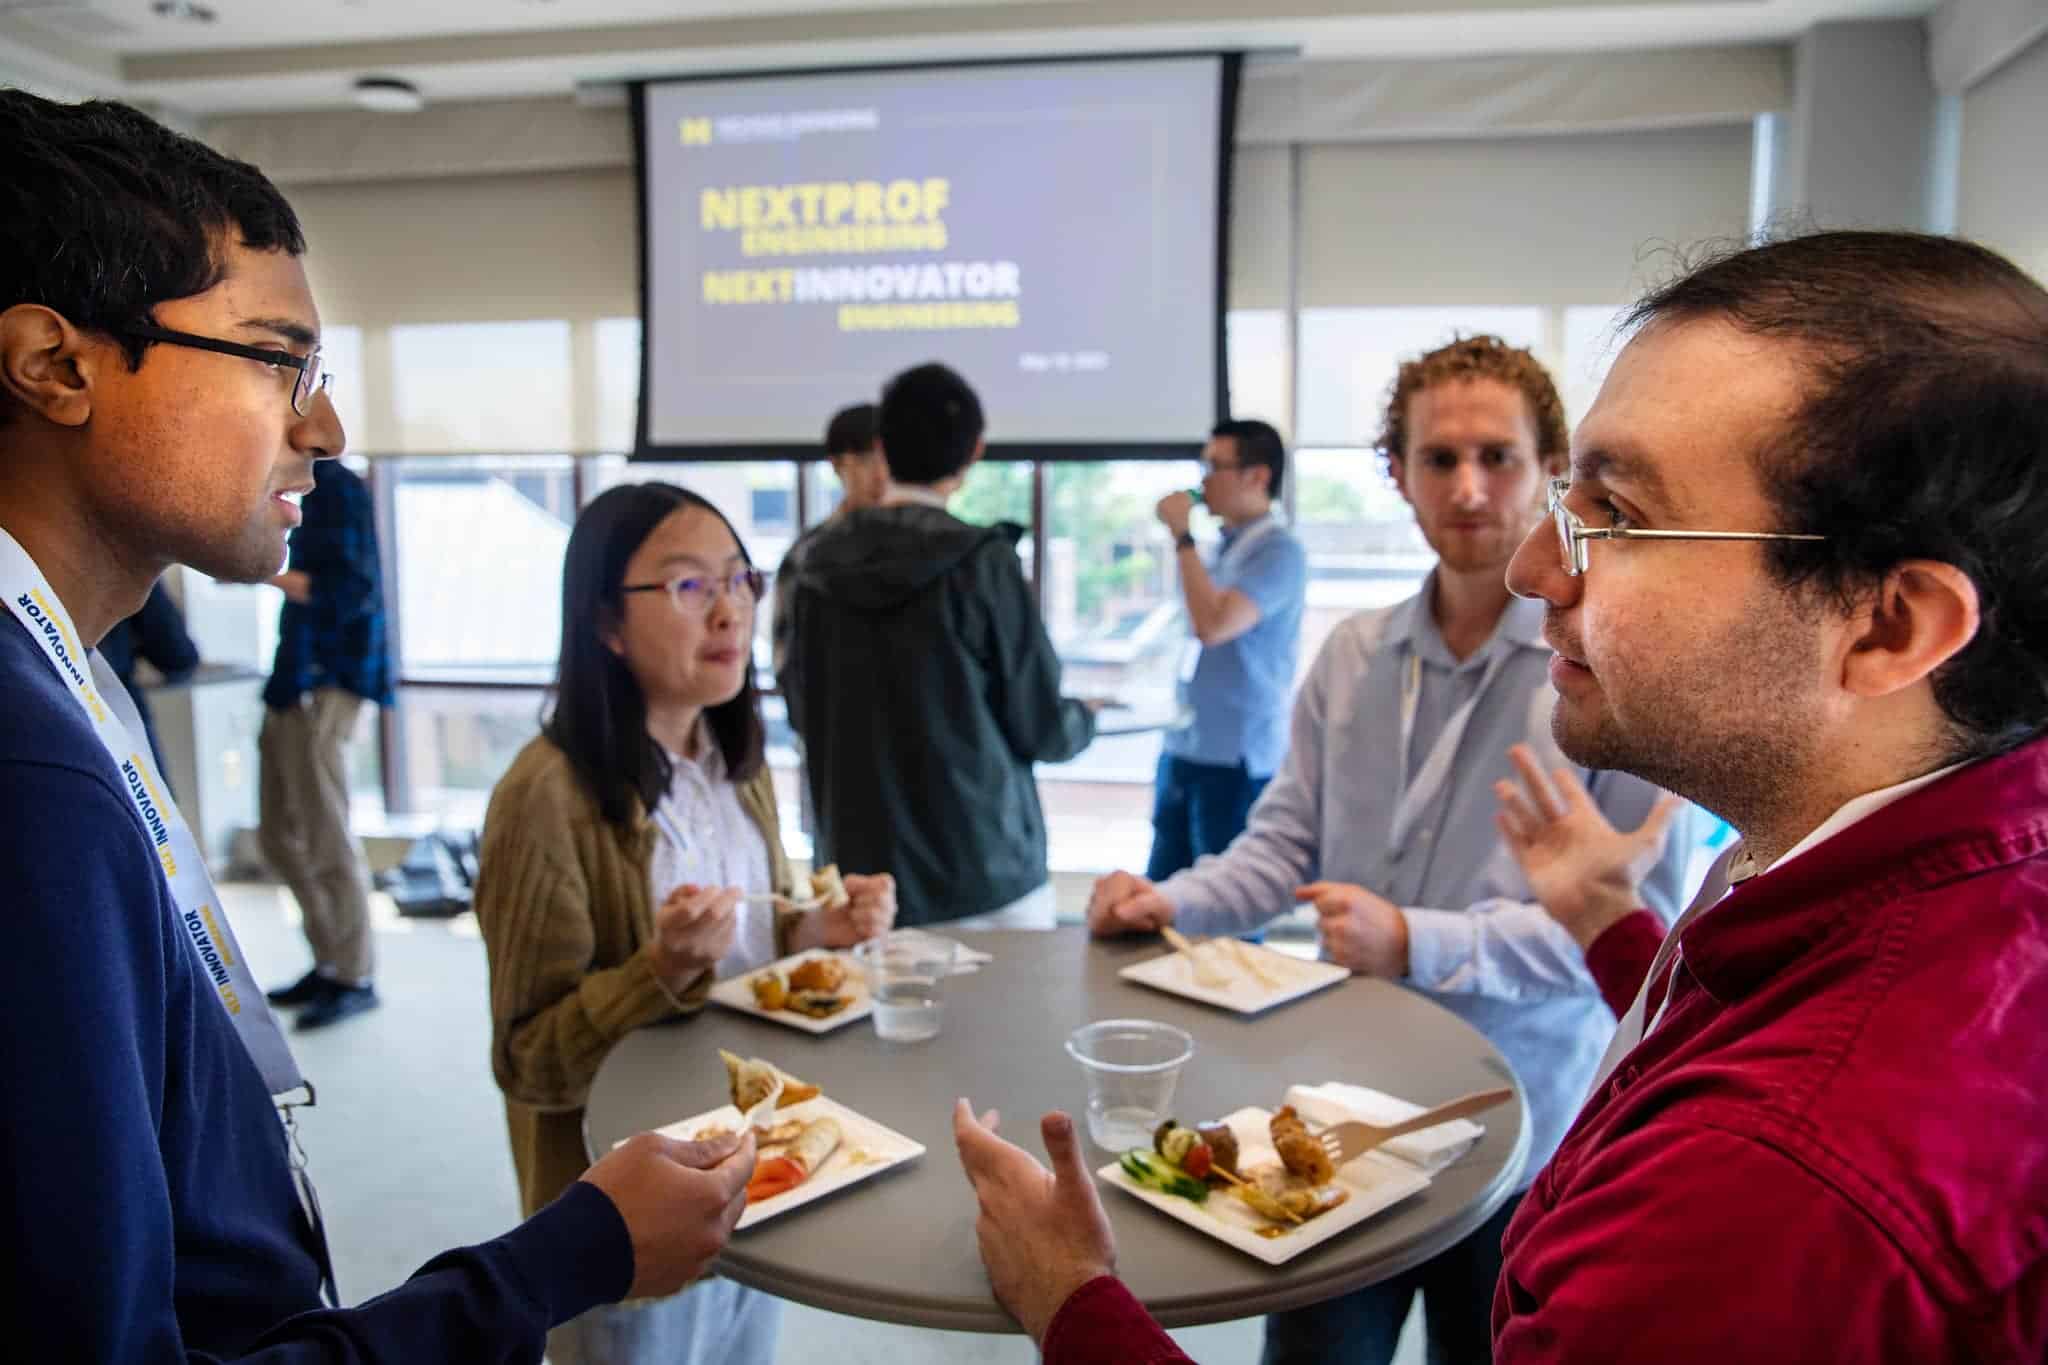 Group of four people chatting around a standing table while eating. Projection screen in background reads "NextProf Engineering" and "NextInnovator"